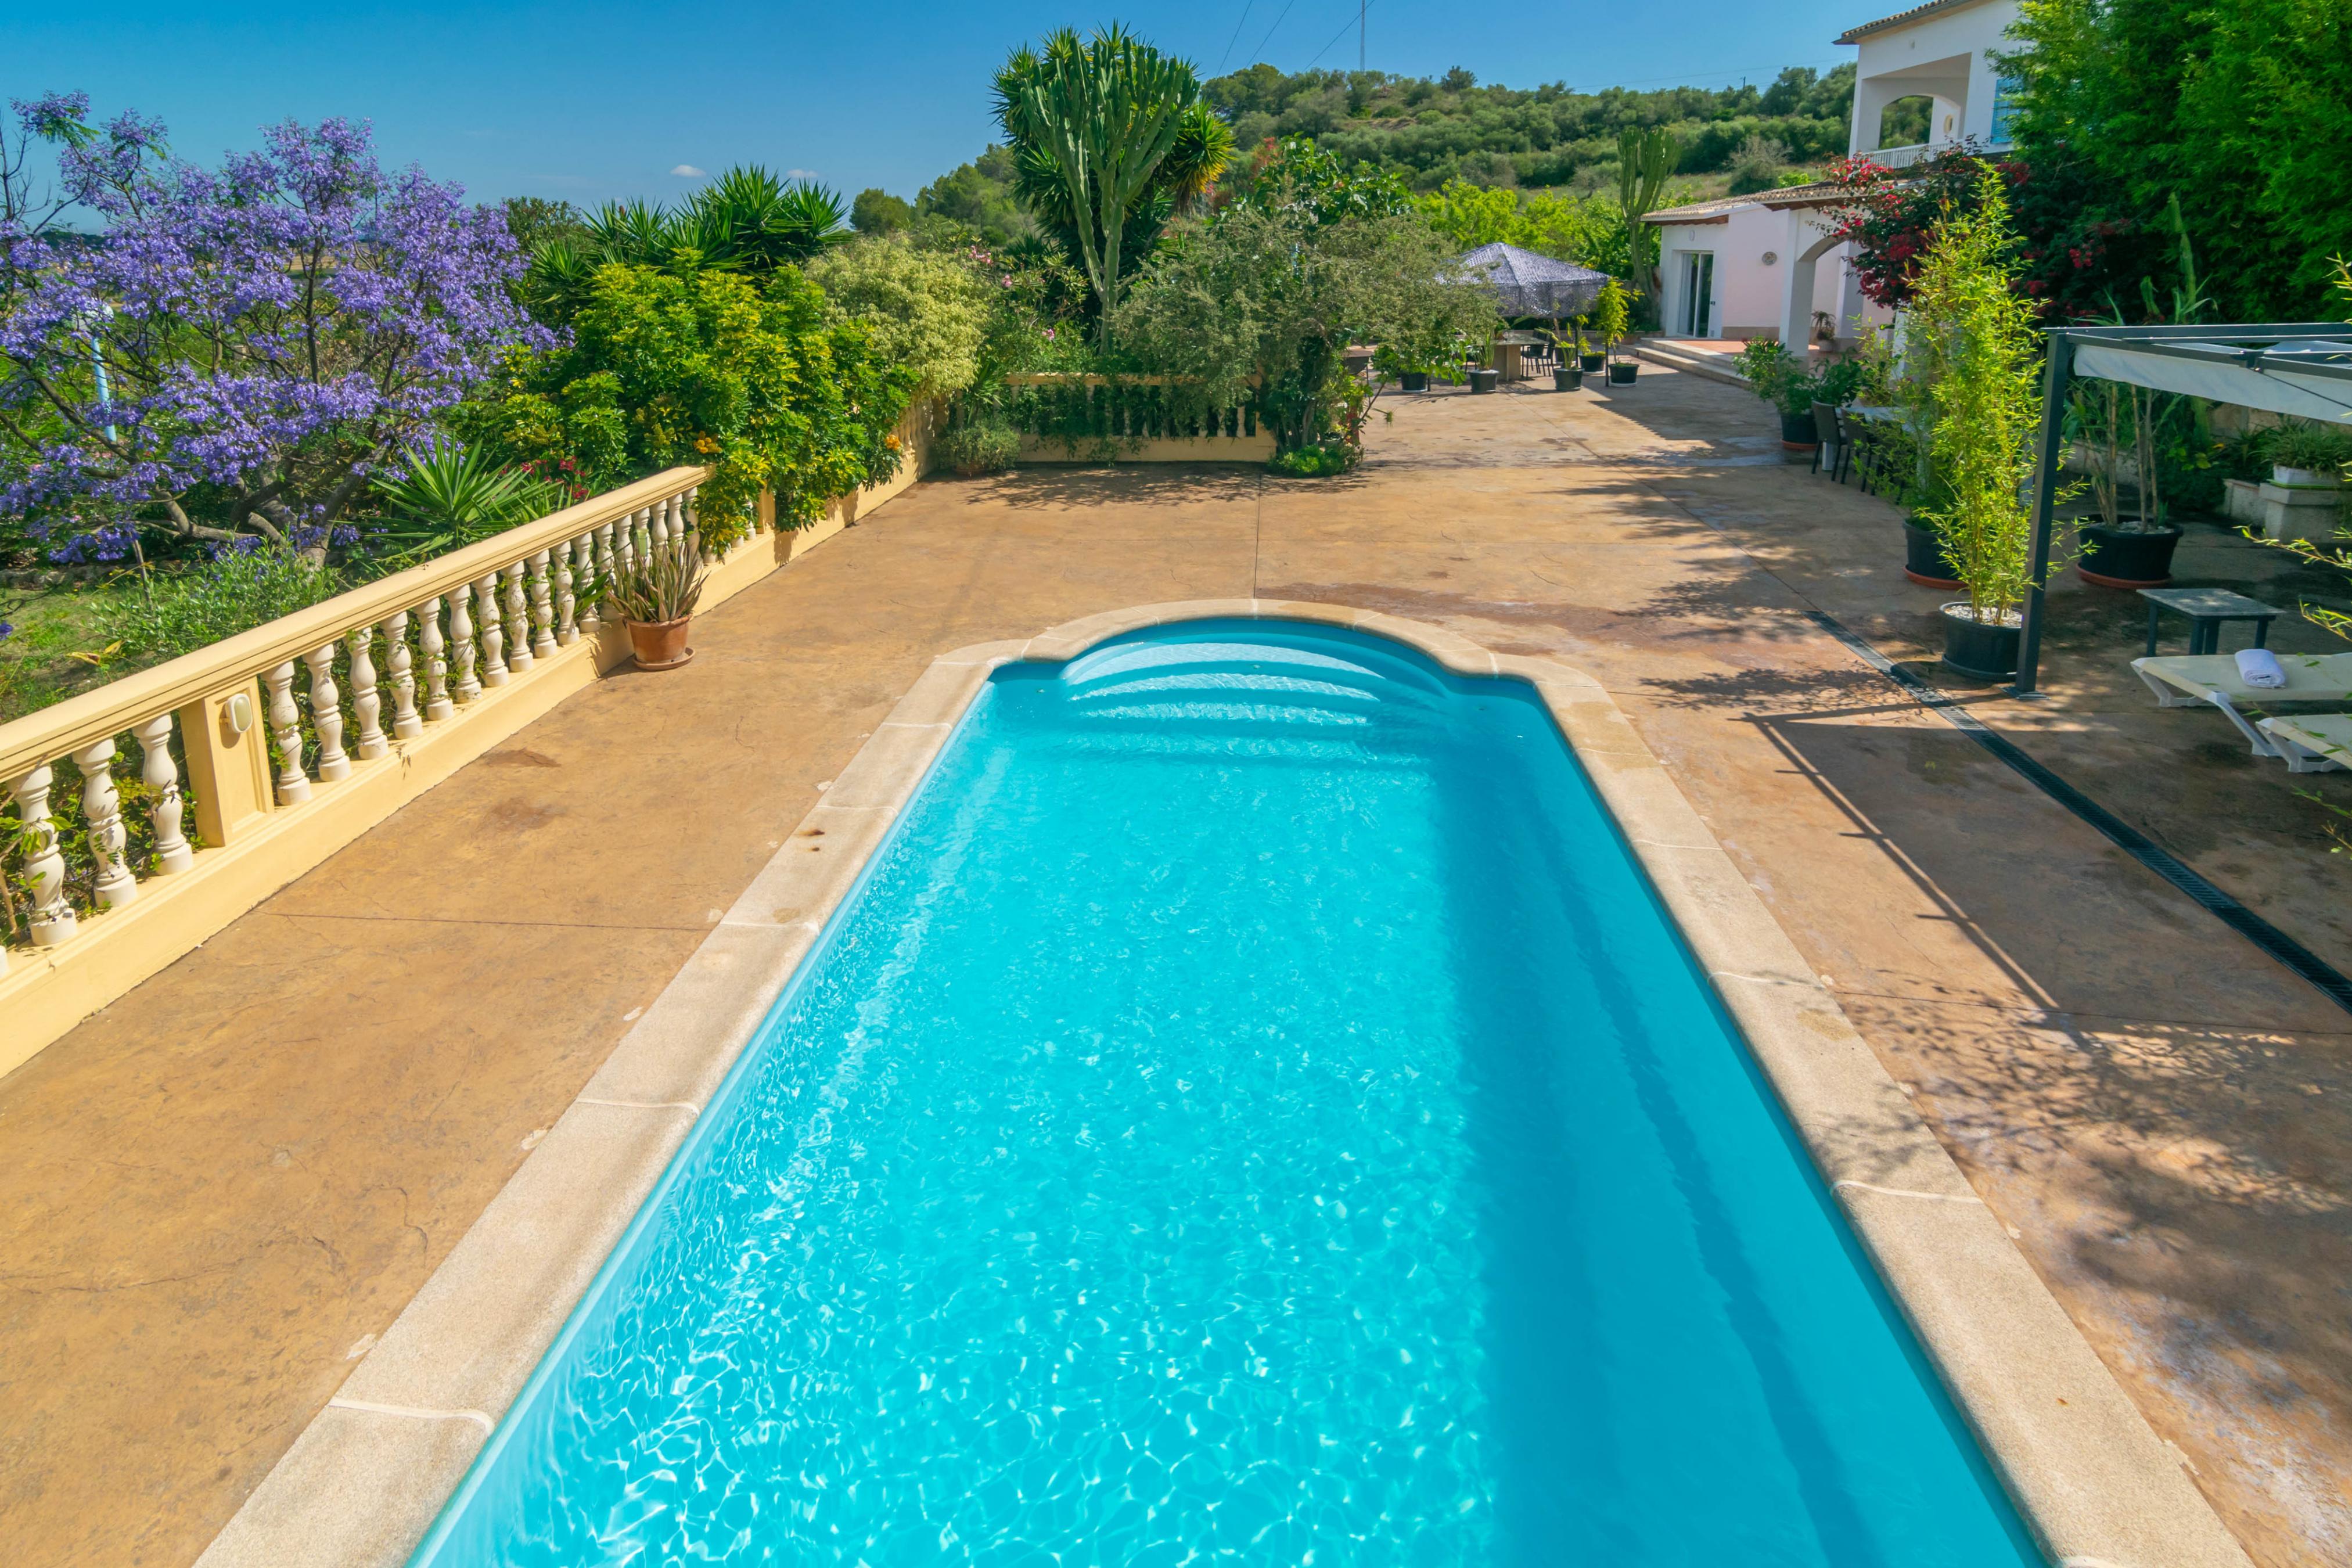 Property Image 2 - SA CAPELLA - Beautiful country house with private pool and a few km from the beach. Free WIFI.